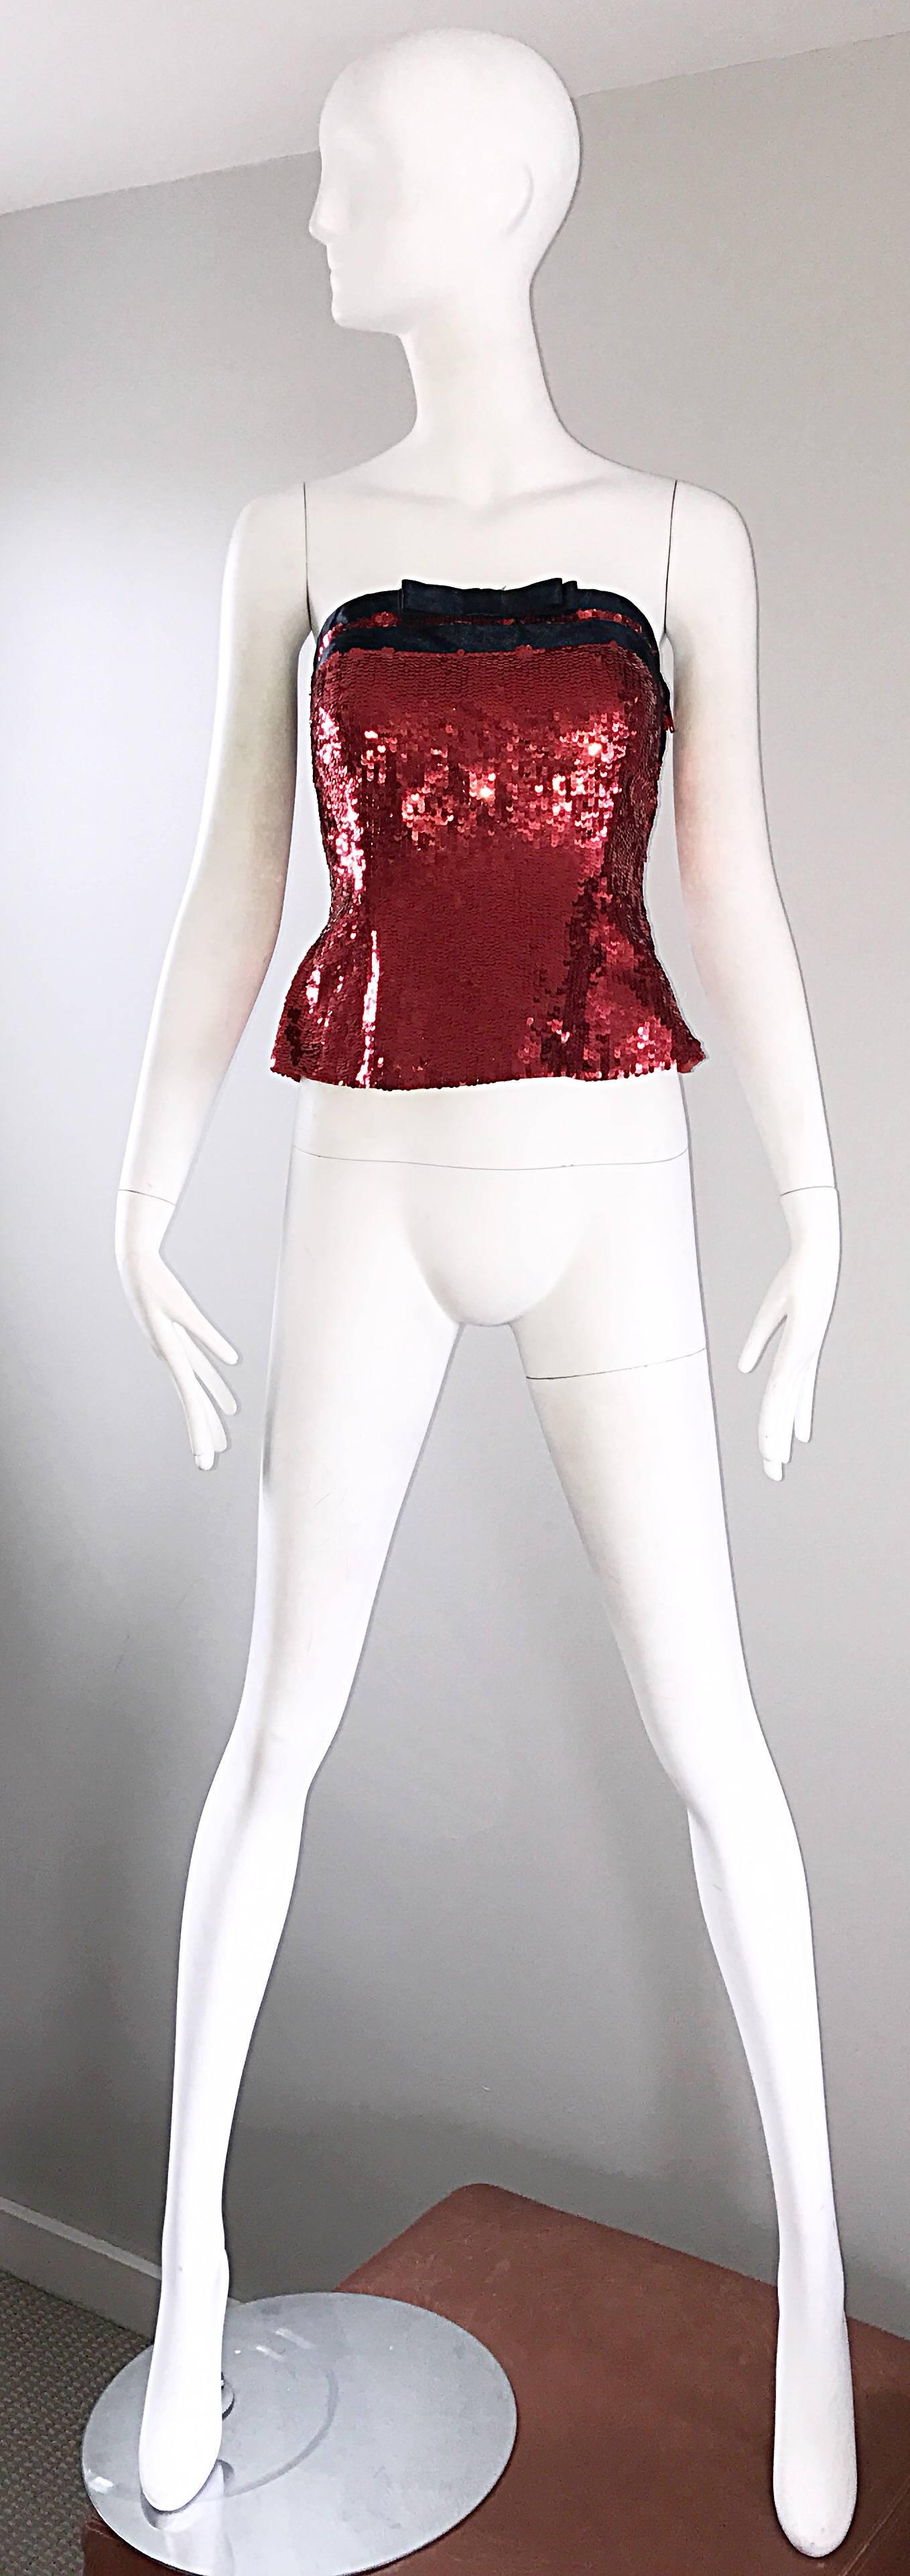 1990s Bill Blass Size 6 Red Sequin Black Strapless Bustier Vintage Corset Top In New Condition For Sale In San Diego, CA